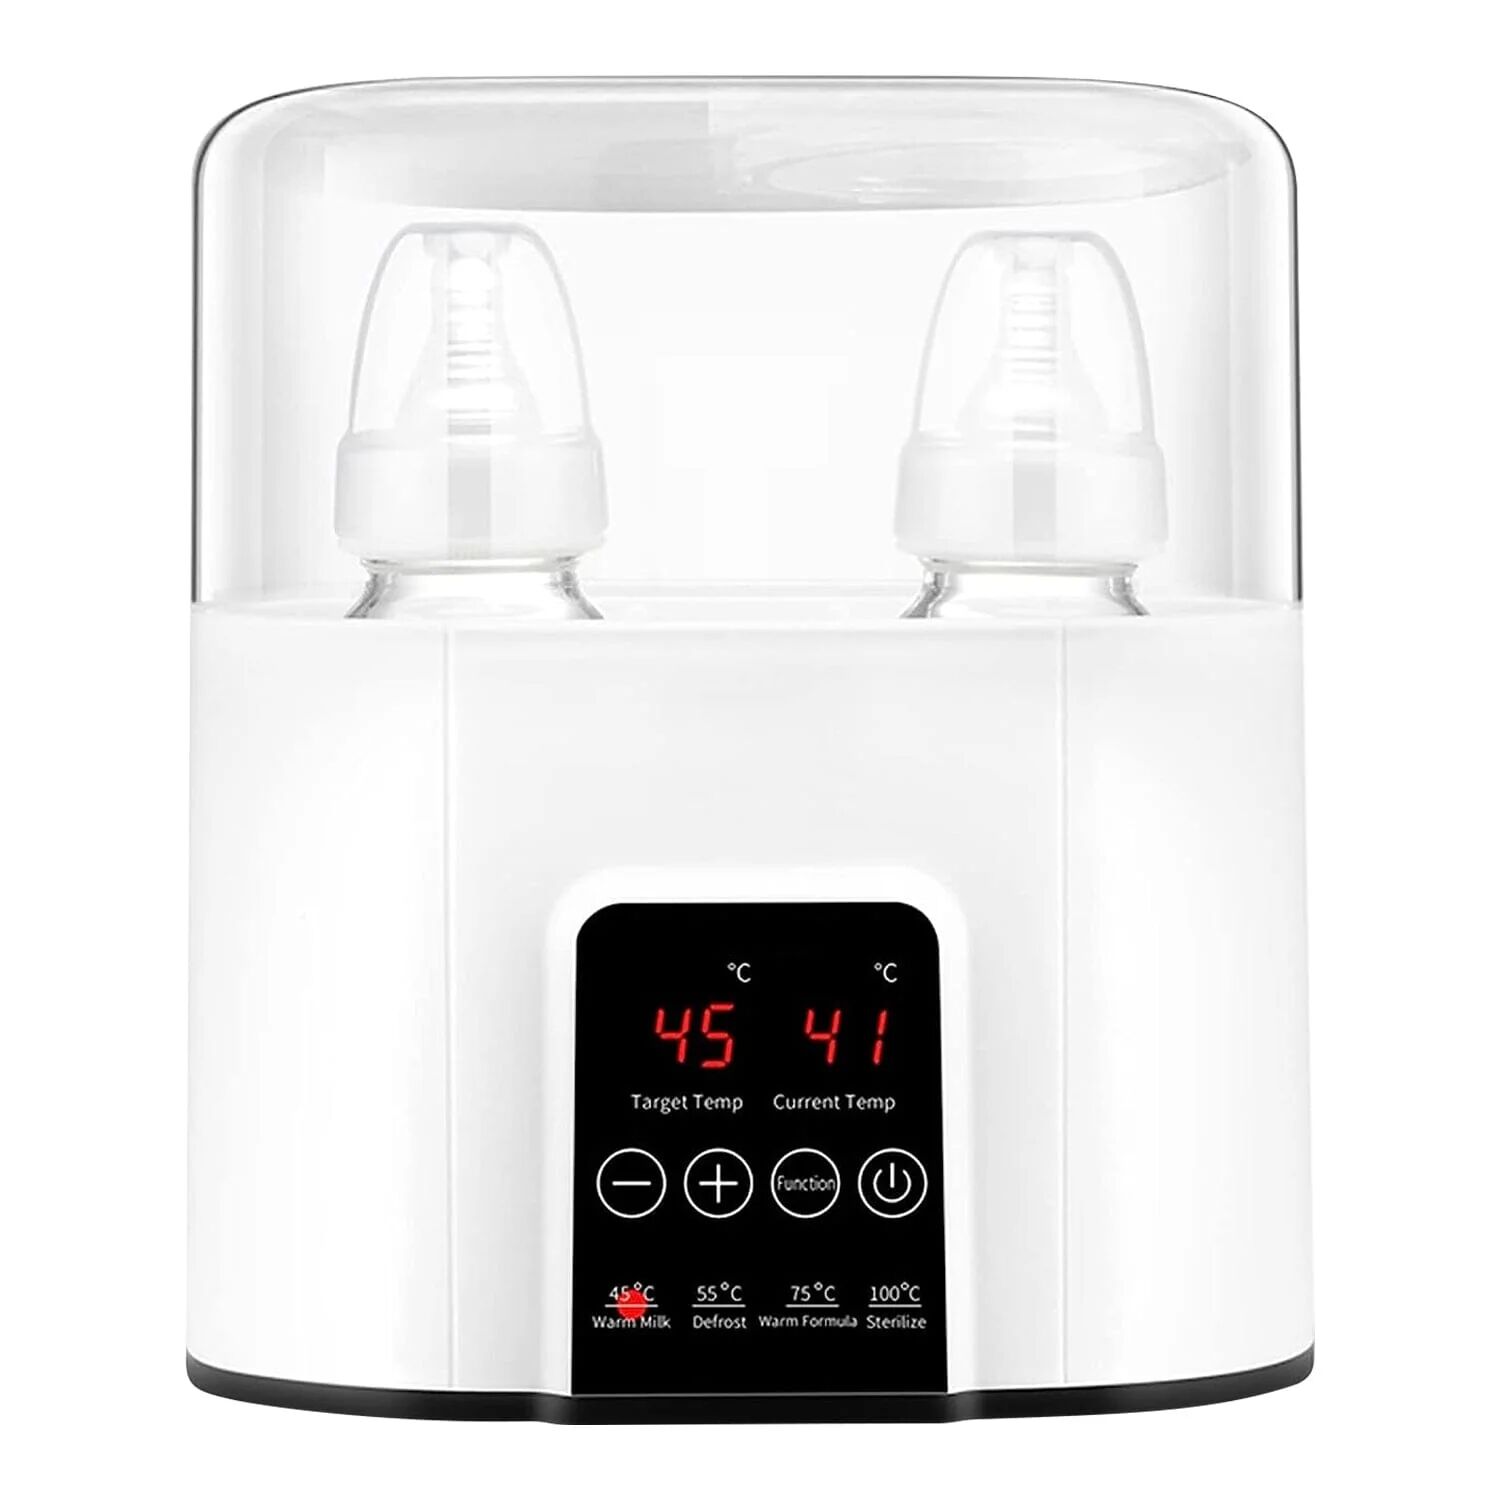 DailySale Electric Baby Milk Bottle Warmer Fit with 4 Heating Modes Adjustable Temperature Display Screen